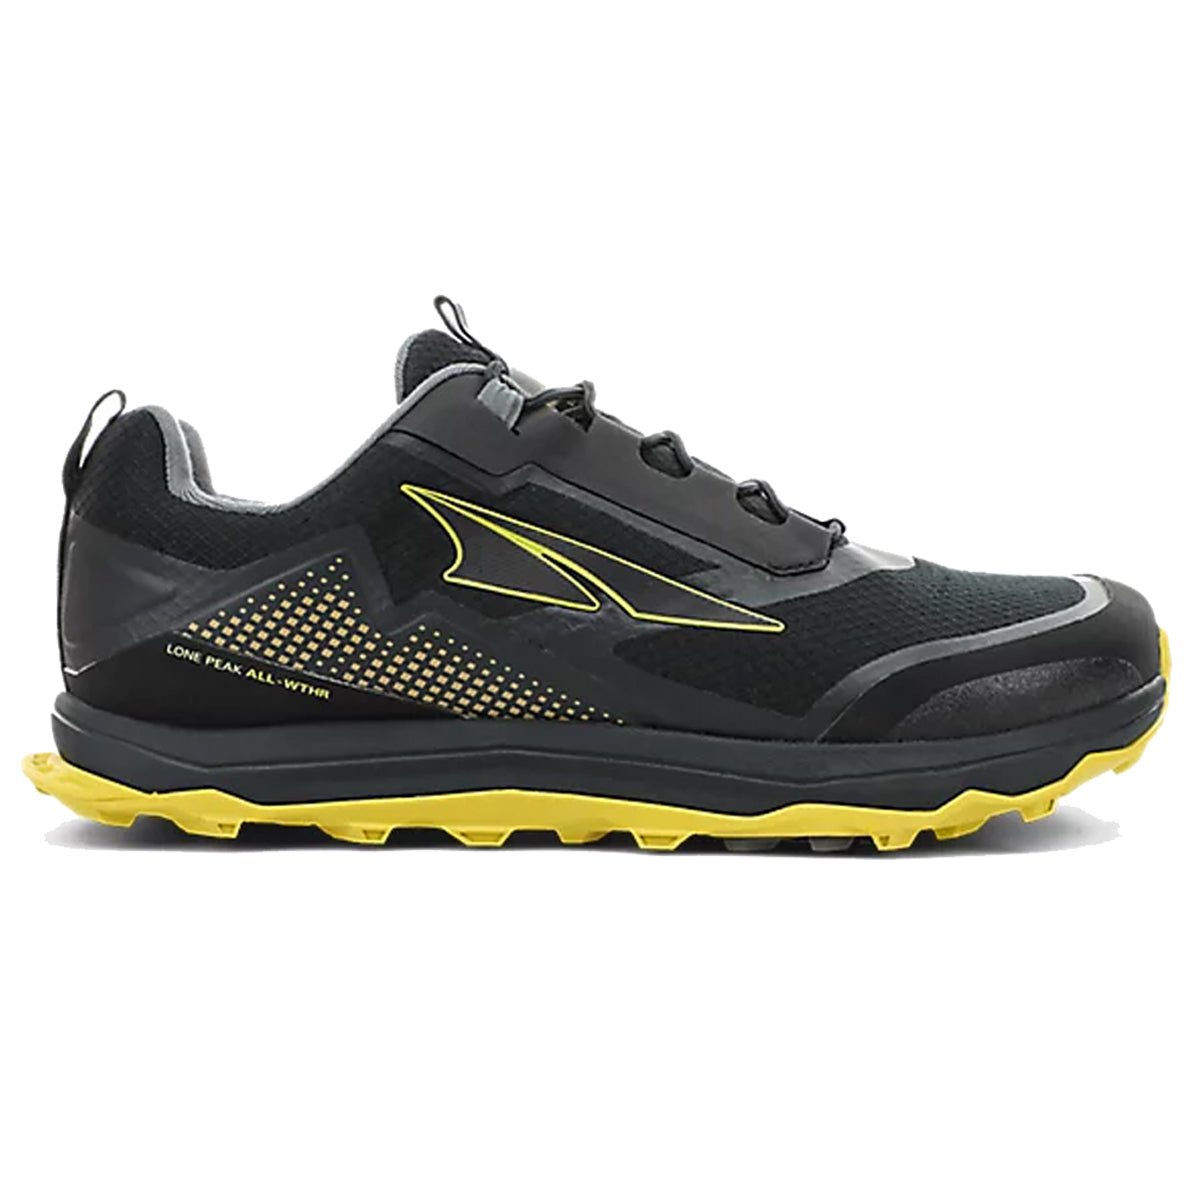 Altra Lone Peak All-WTHR Low in Black & Yellow by GOHUNT | Altra - GOHUNT Shop